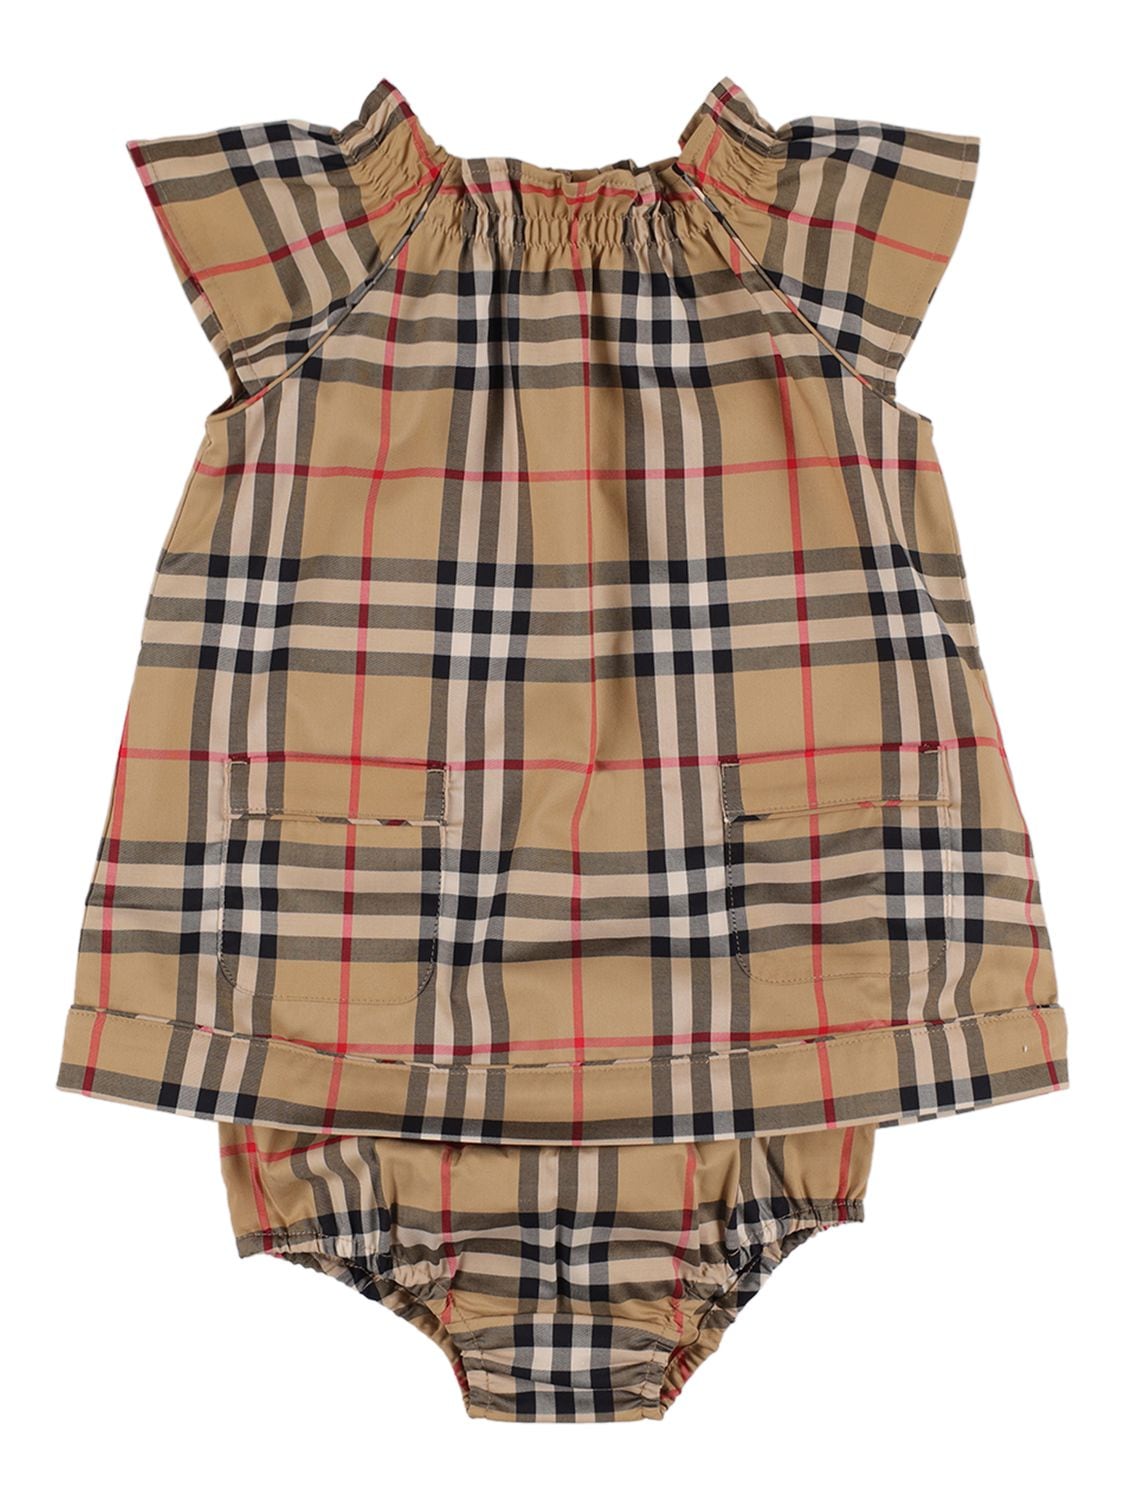 Burberry Babies' Check Print Cotton Dress W/ Diaper Cover In Beige,black